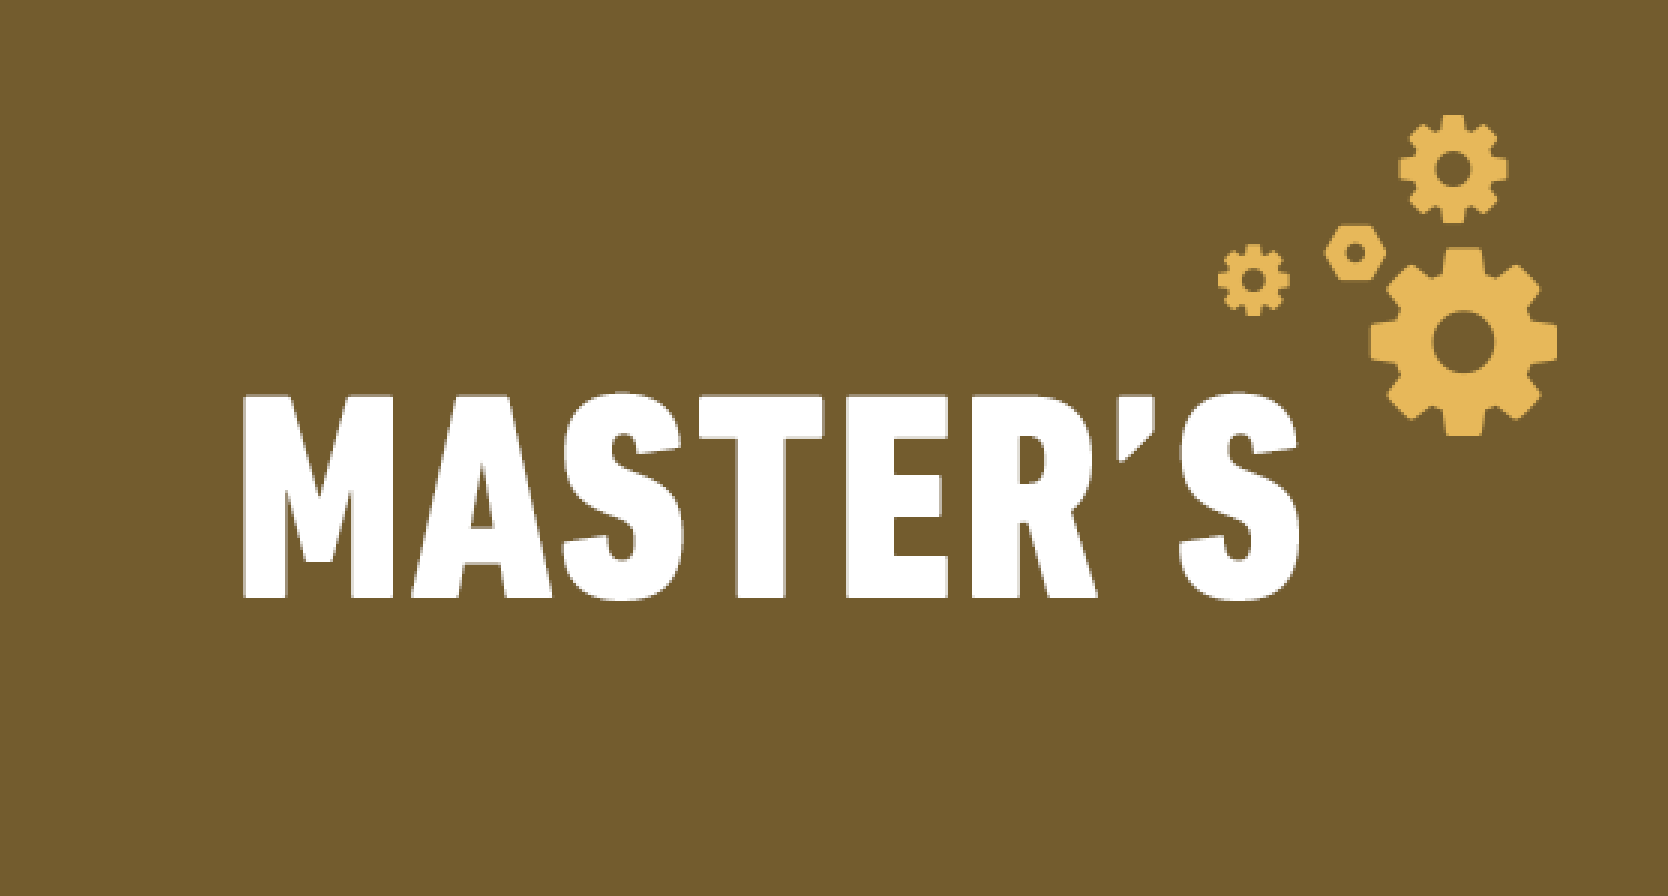 Master's sign